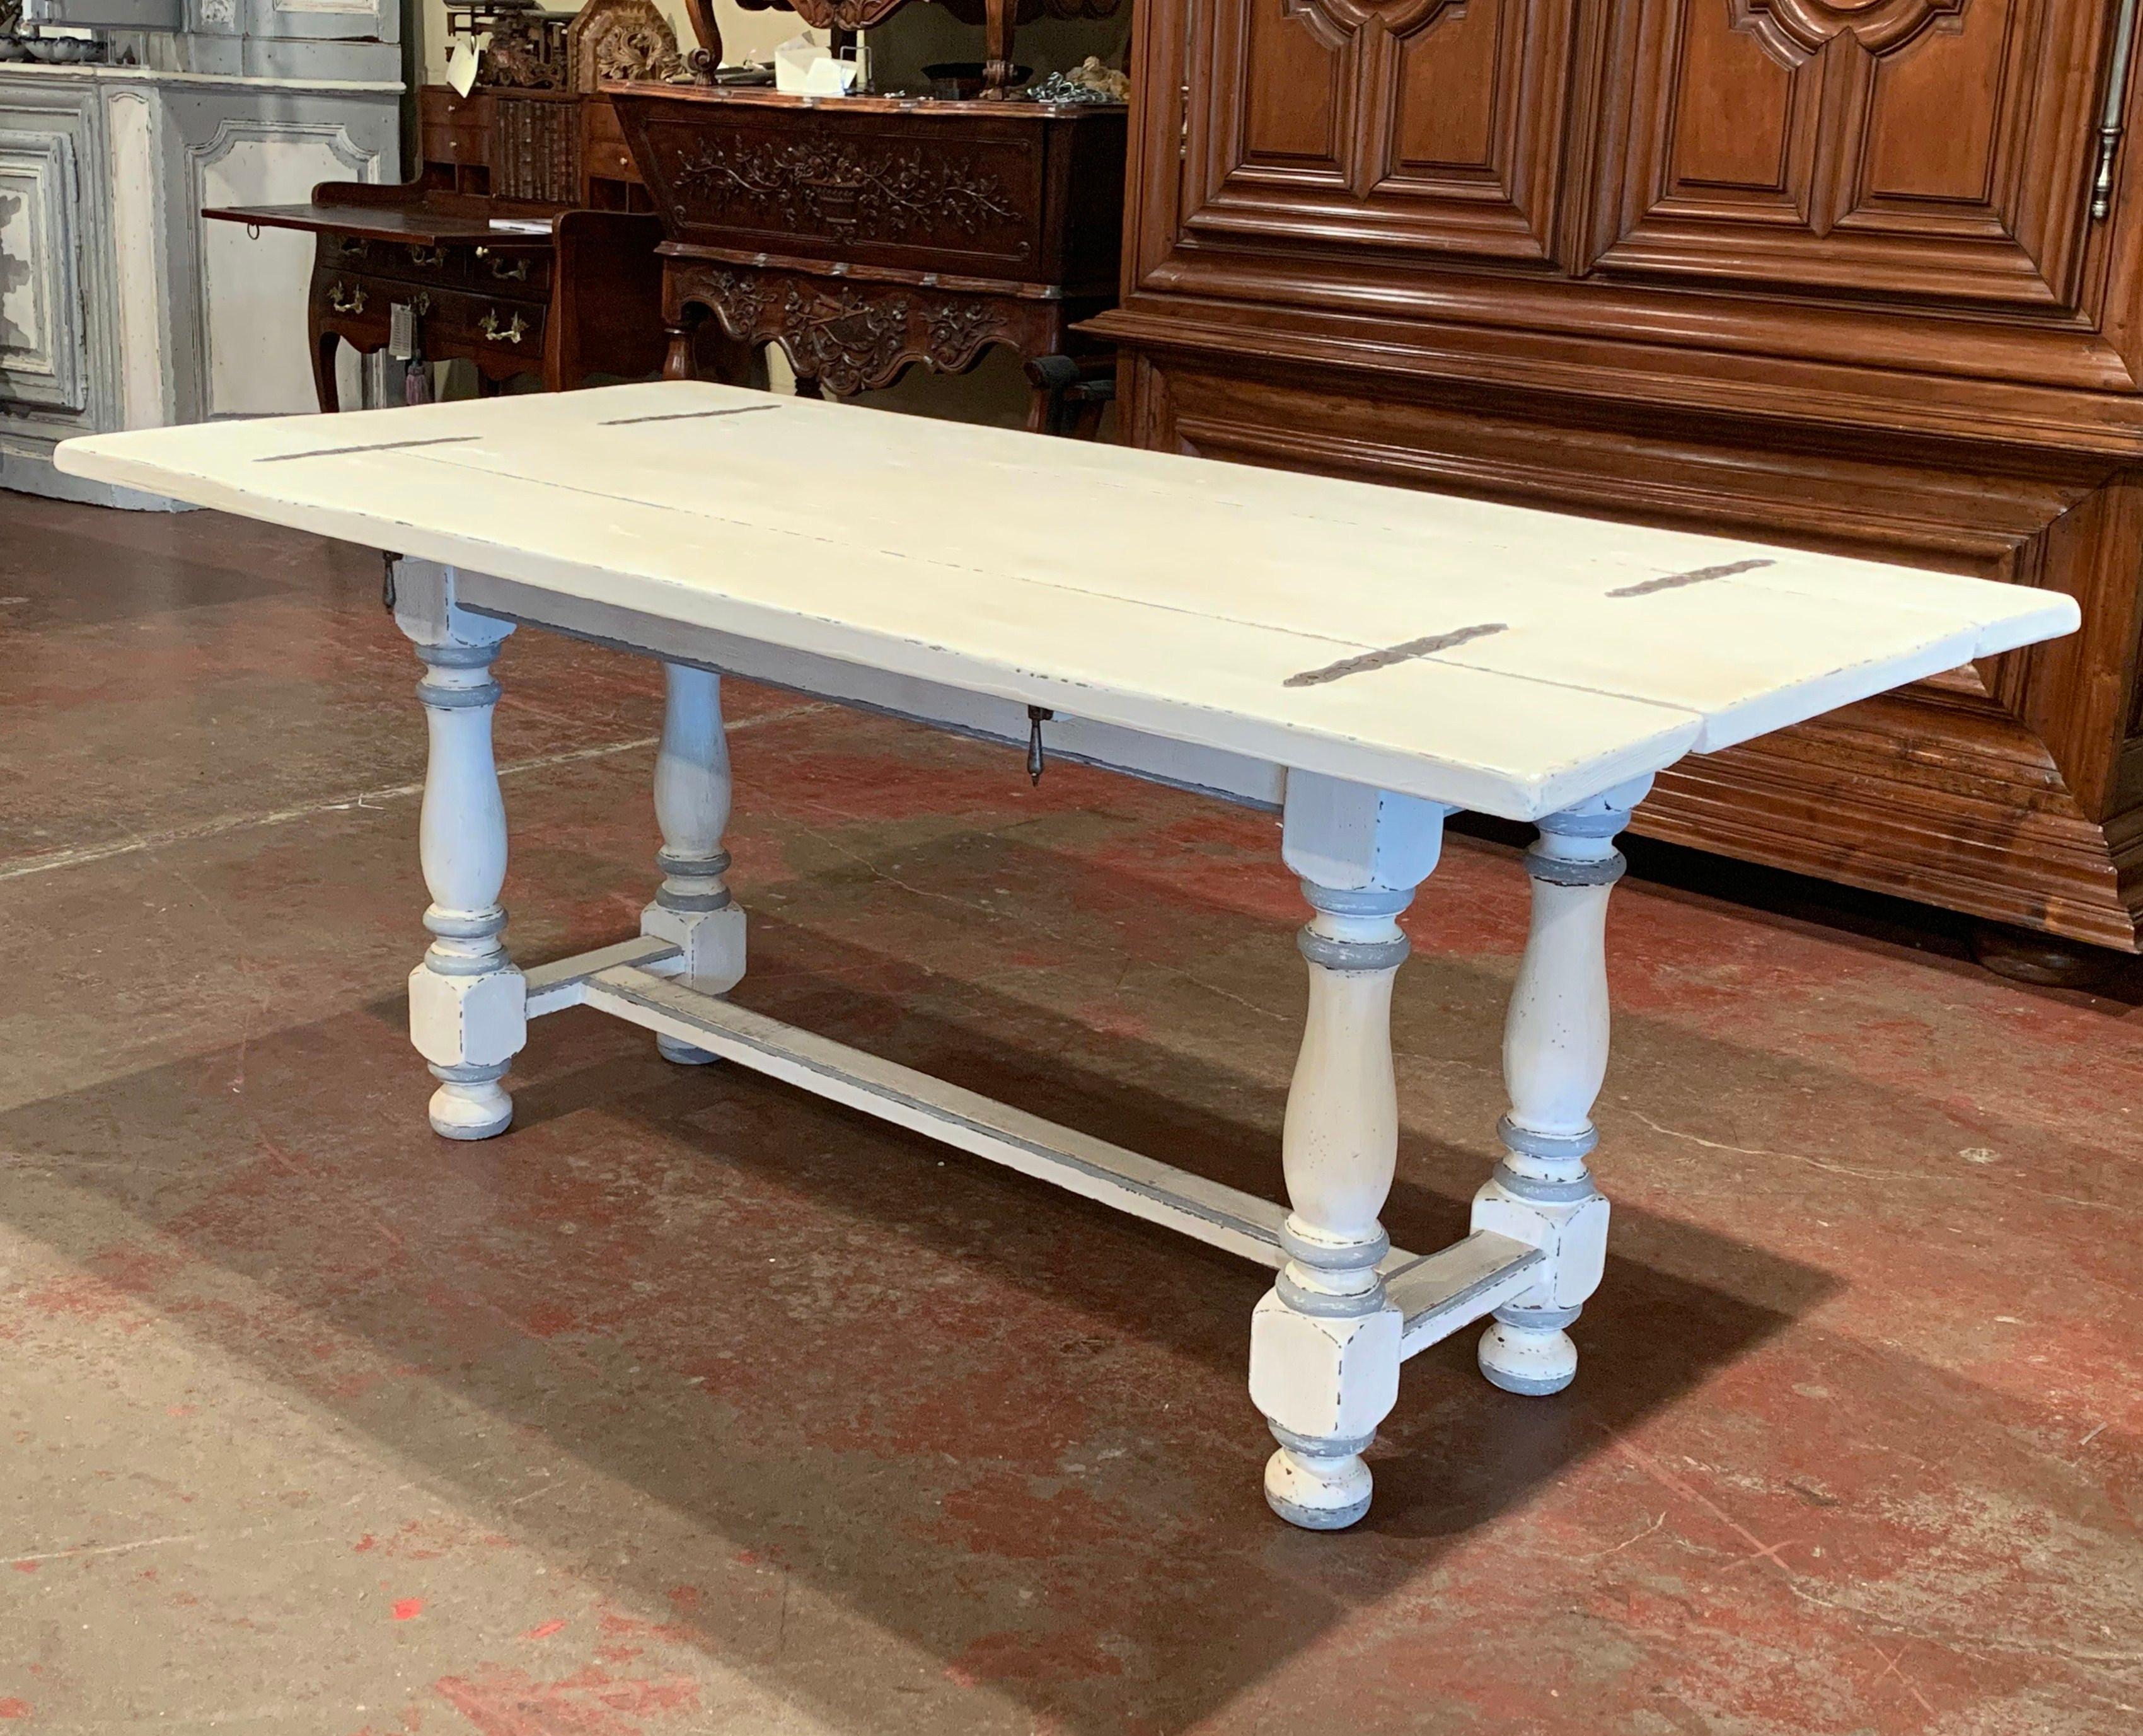 Place this elegant console table against a wall or behind a sofa for extra display space. Crafted in Southern France circa 1920, the traditional, painted table features four carved turned legs embellished with a bottom stretcher. The top has two